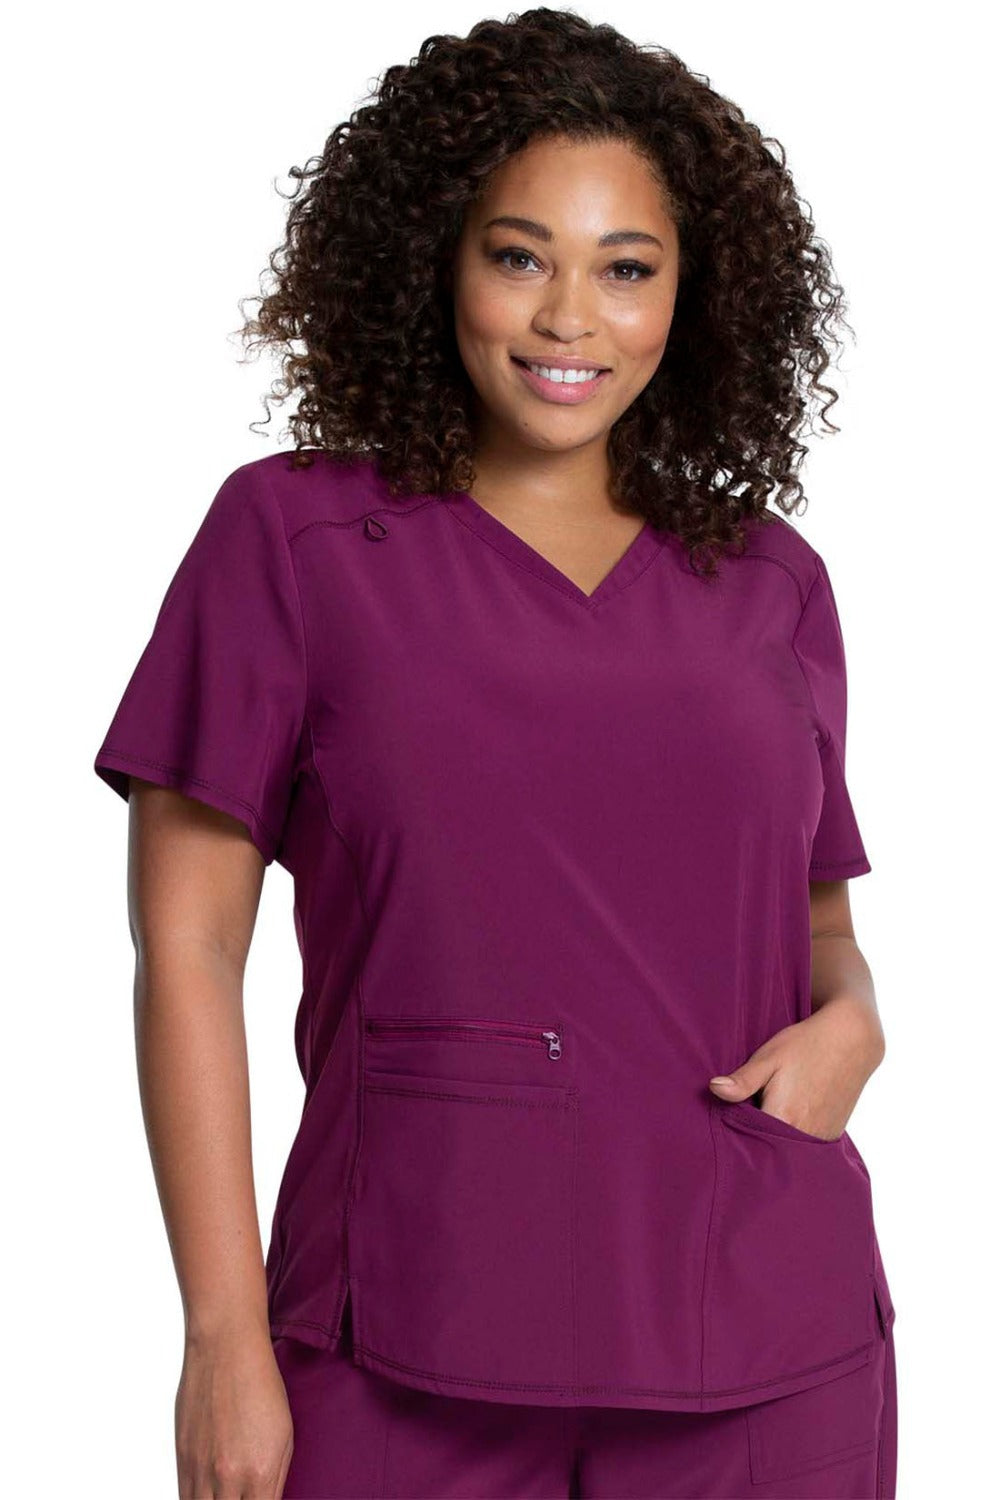 Cherokee Allura V-Neck Scrub Top in Wine at Parker's Clothing and Shoes.